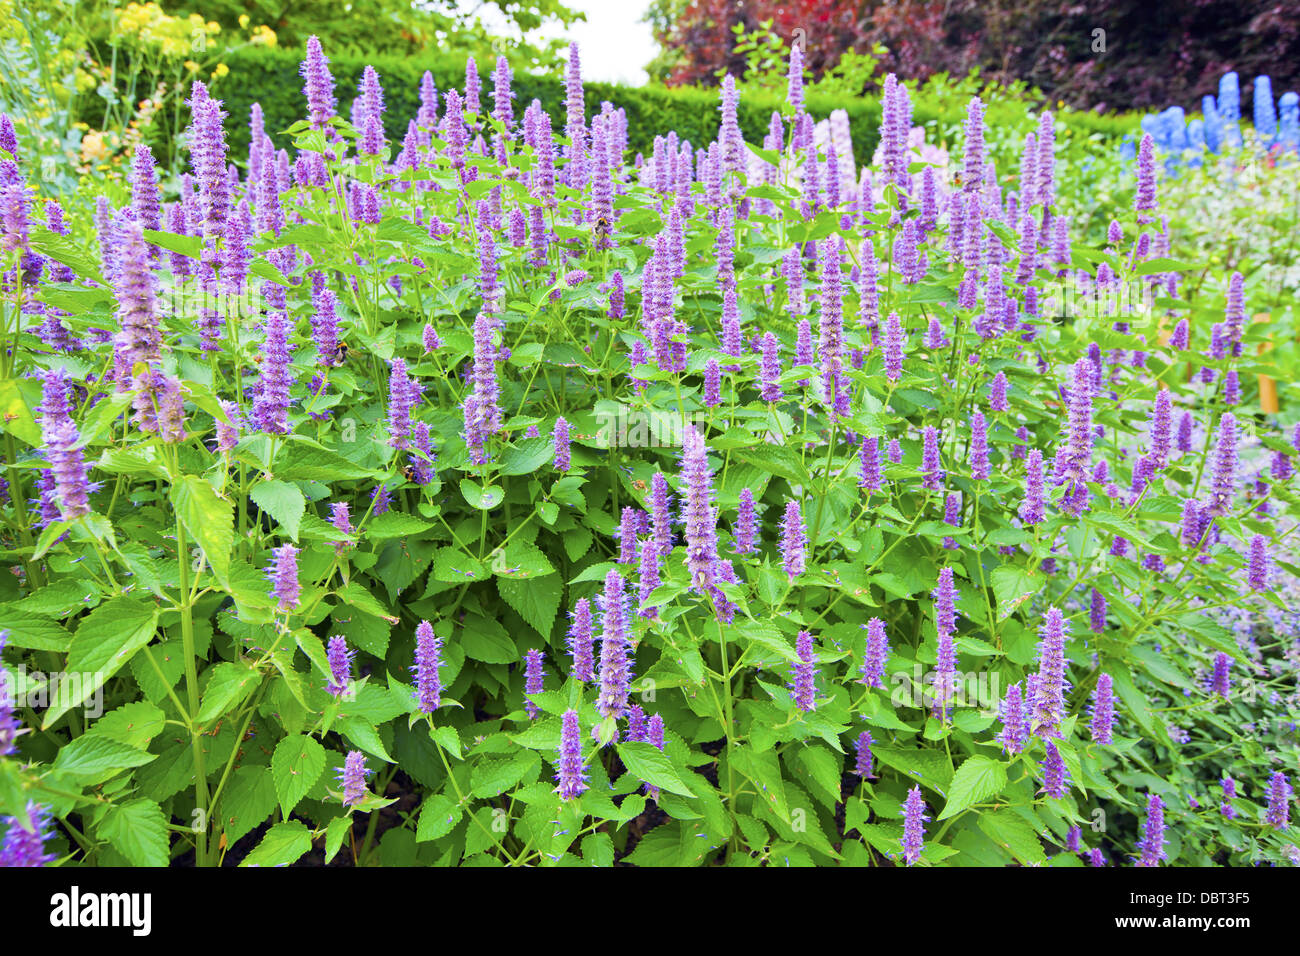 Agastache 'Blue Fortune' (Blue Fortune Anise Hyssop) in a garden. Stock Photo